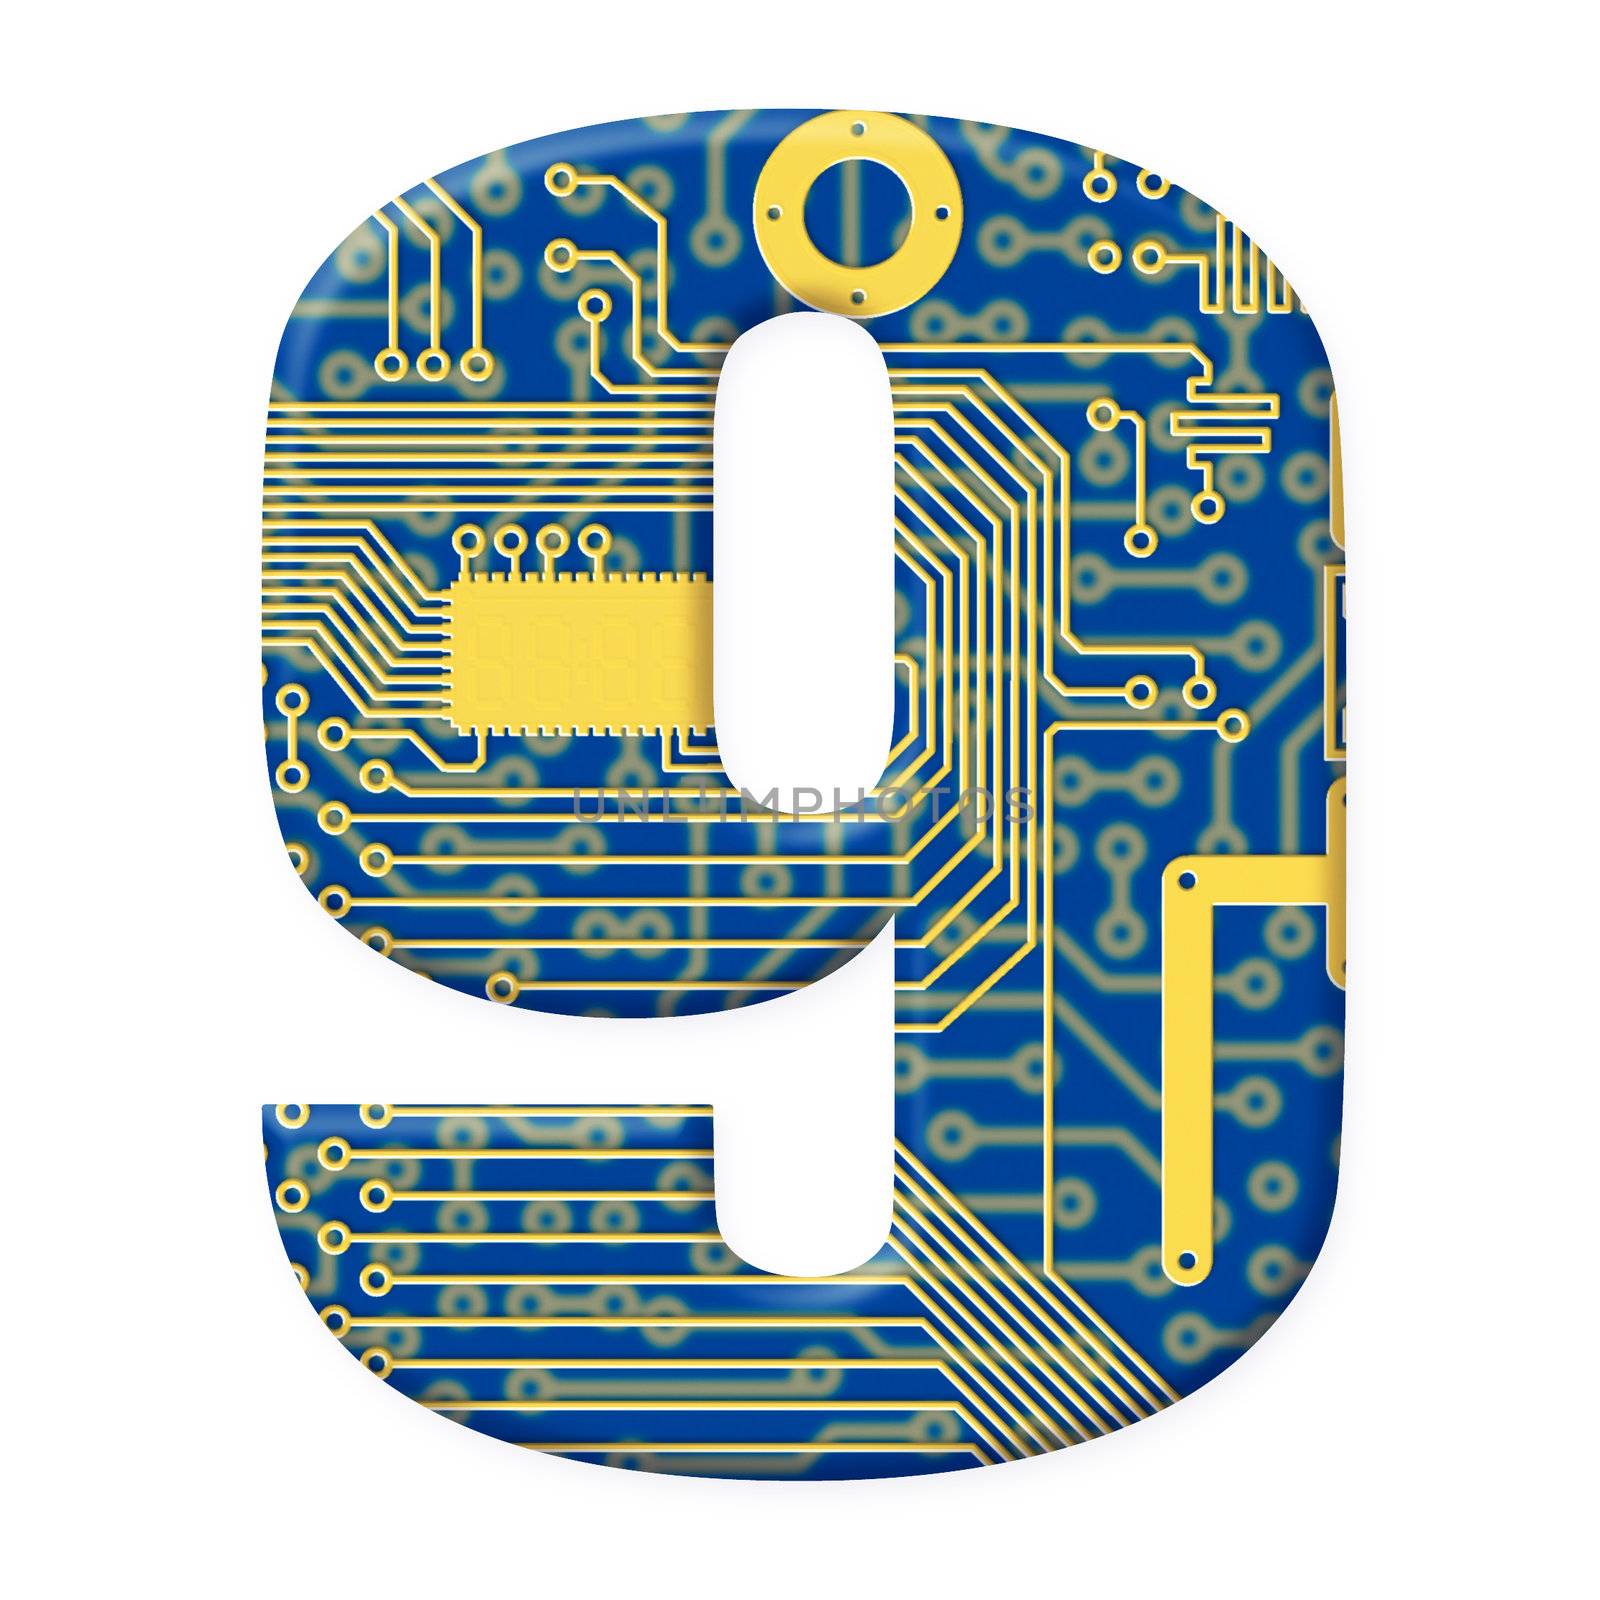 One digit from the electronic technology circuit board alphabet on a white background - 9